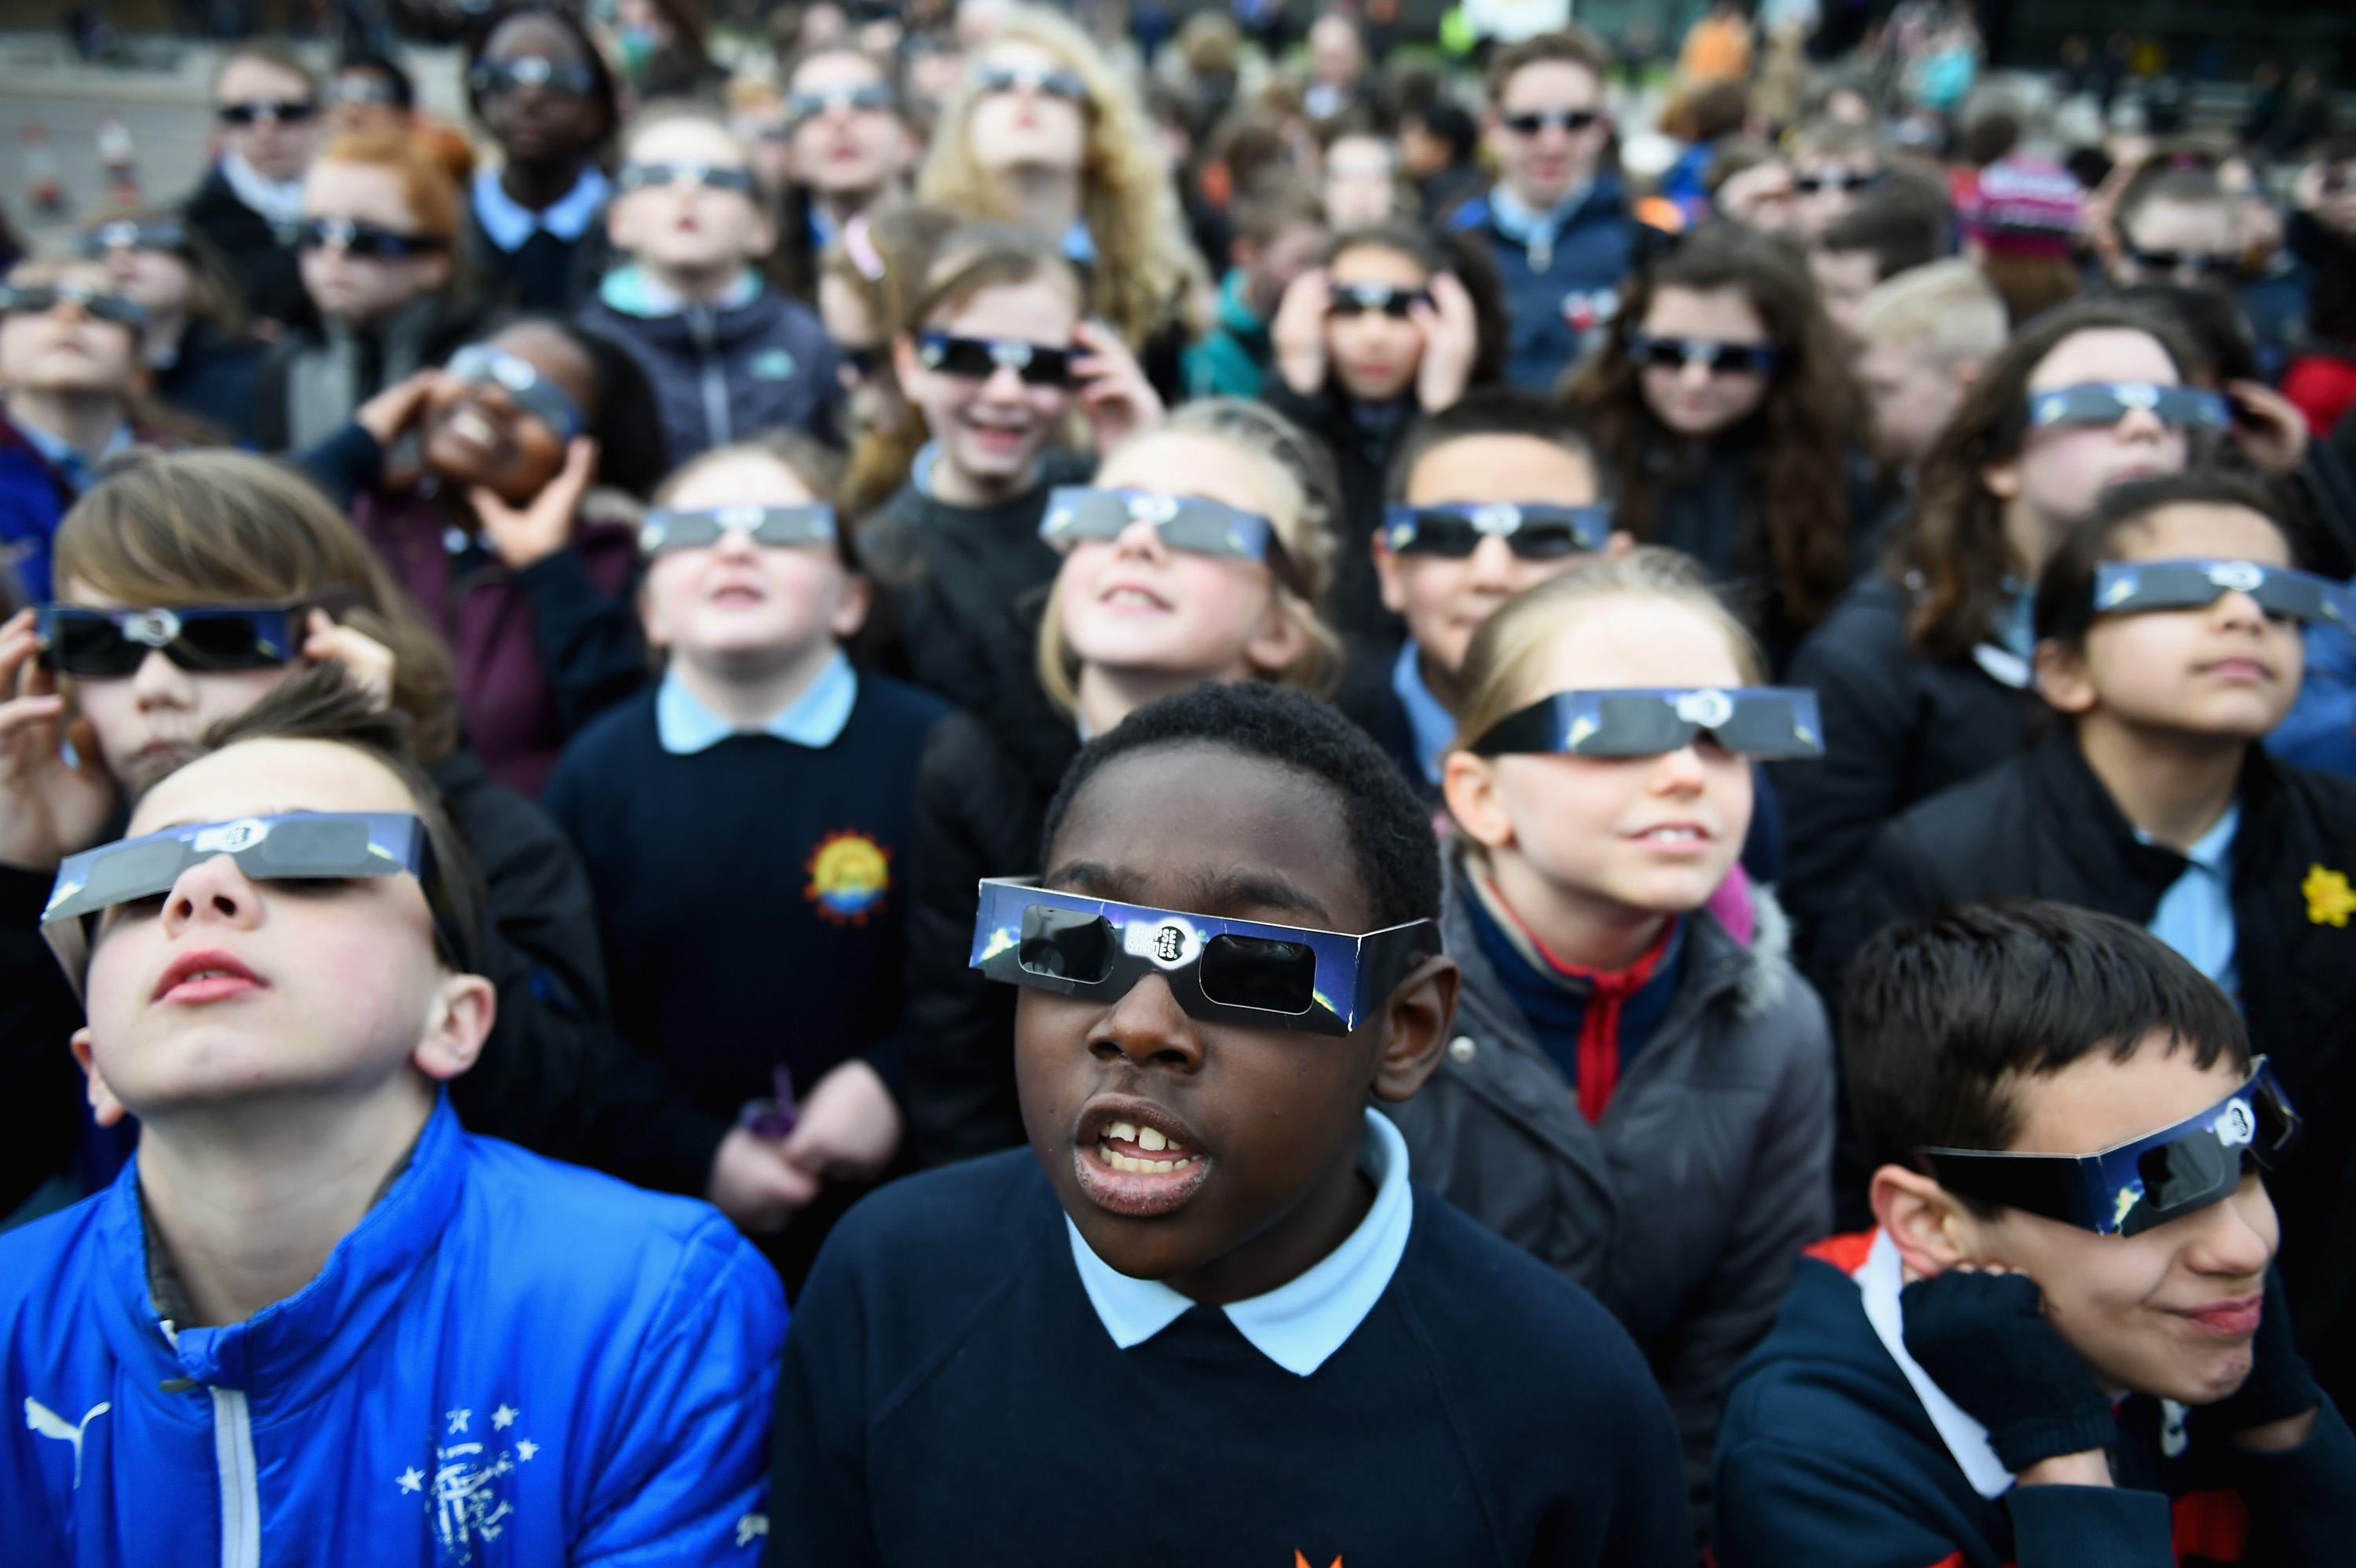 Rare Partial Solar Eclipse Viewing in UK